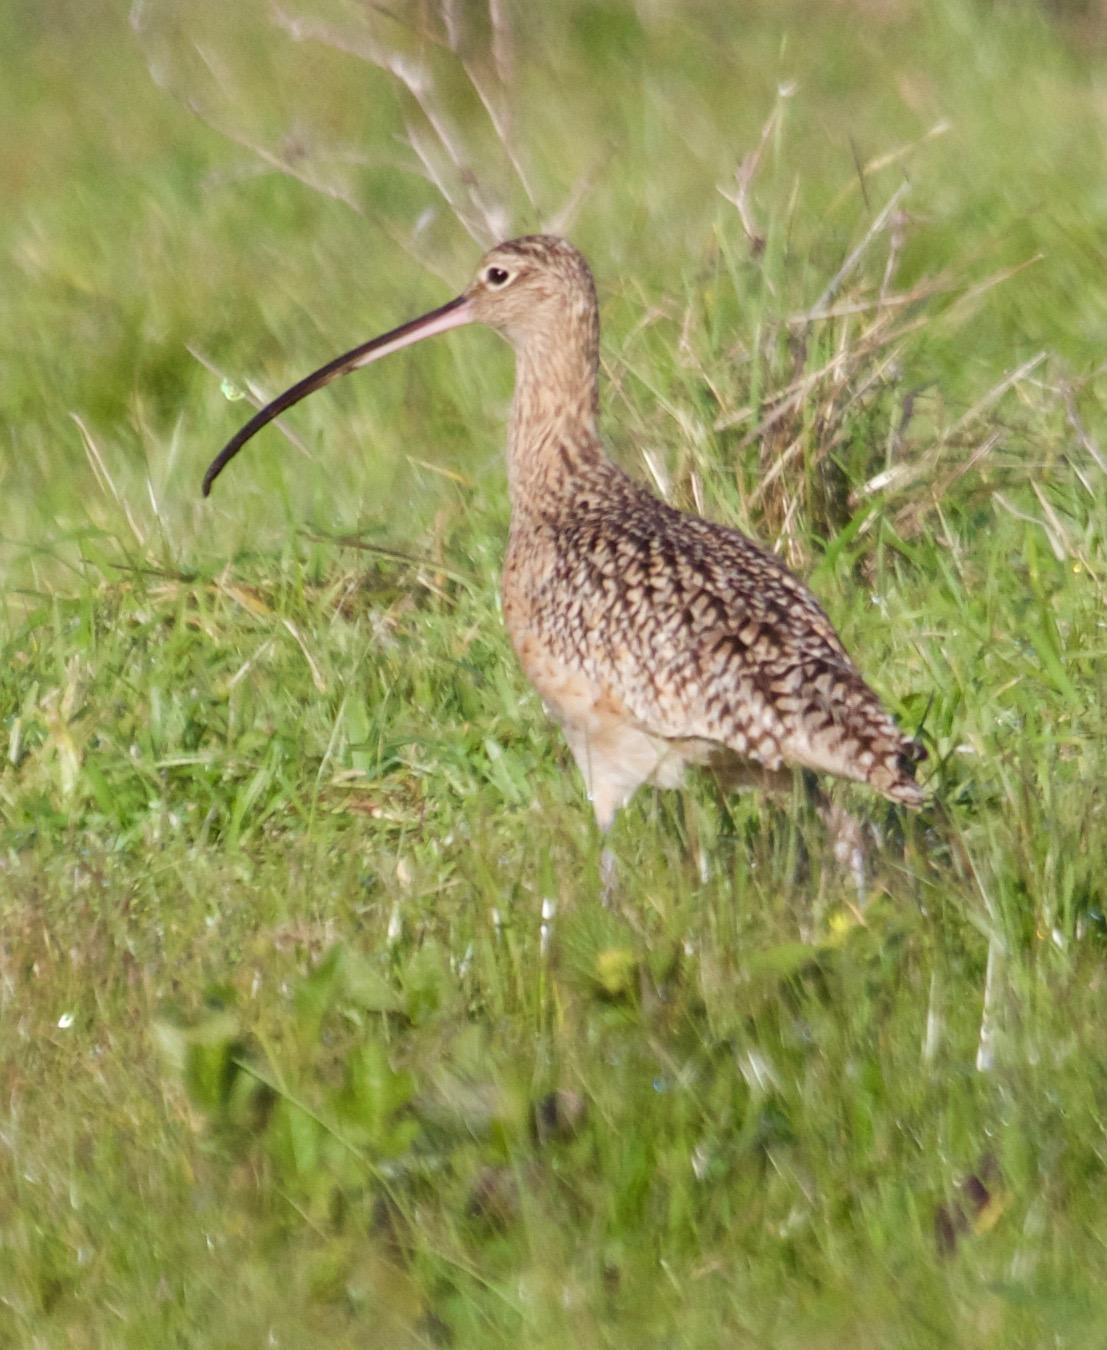 Long-billed Curlew Photo by Rob O'Donnell